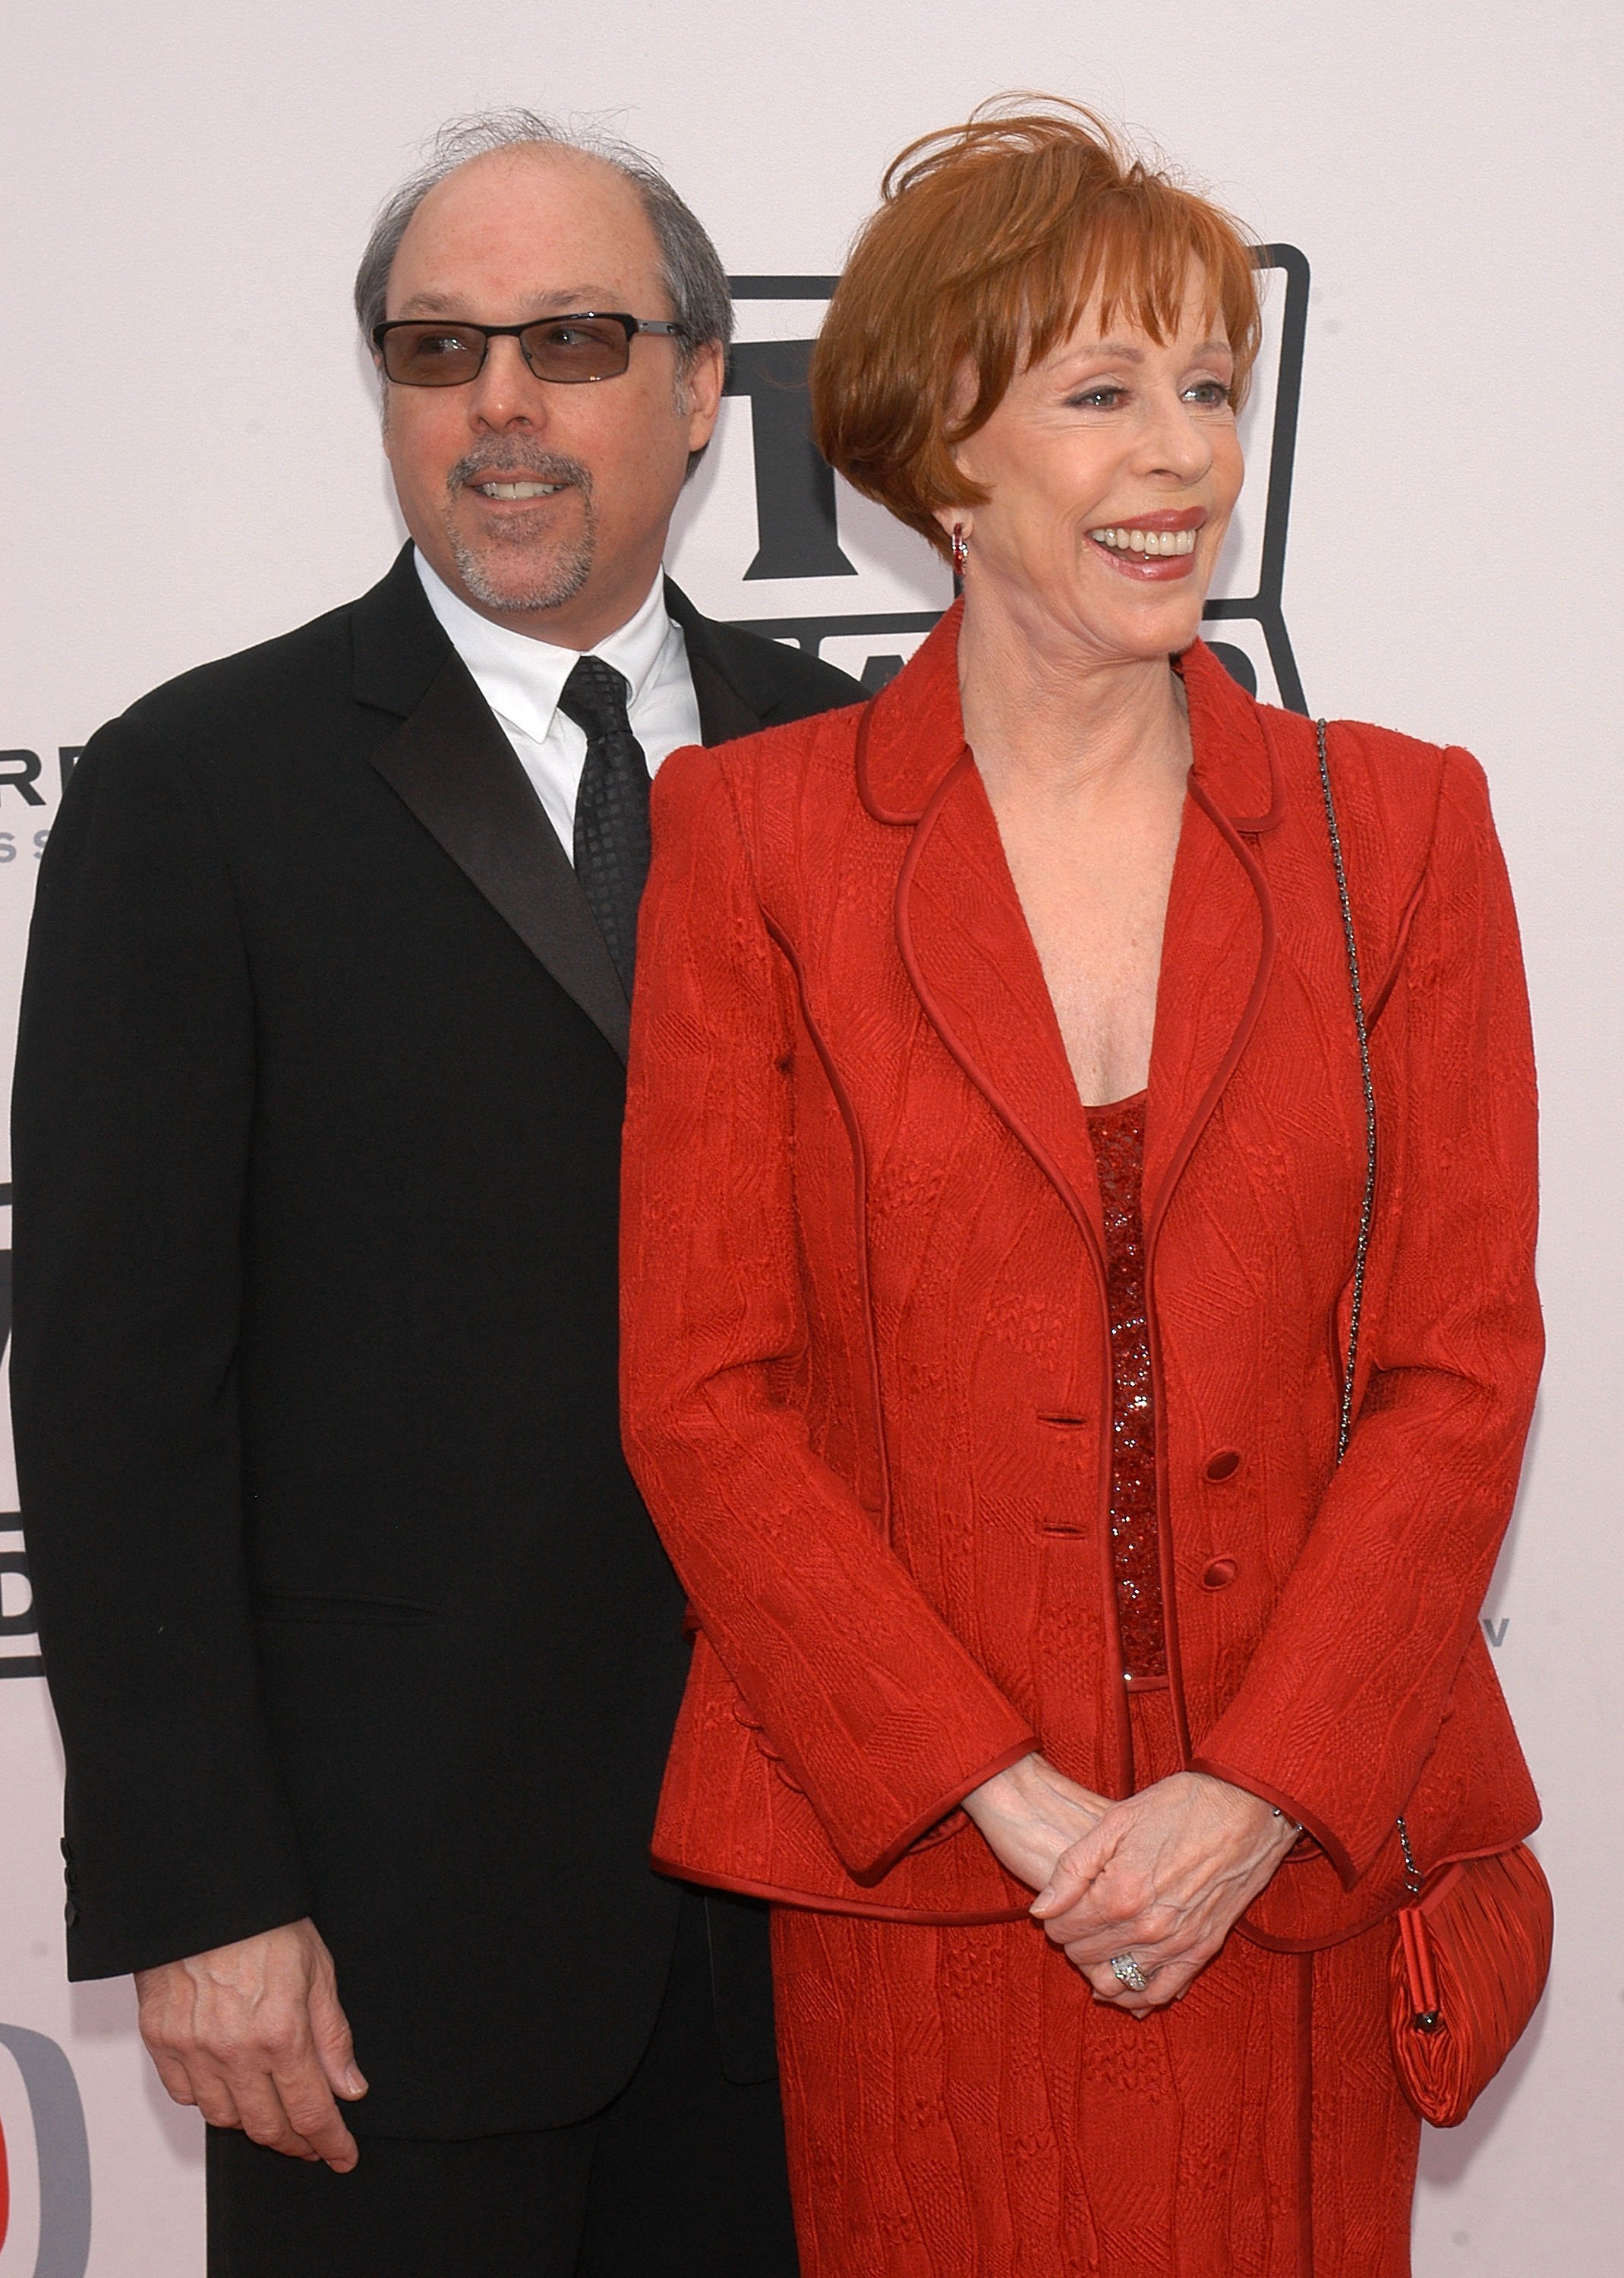 Carol Burnett and Brian Miller at the 2005 TV Land Awards on March 13, 2005 | Photo: GettyImages